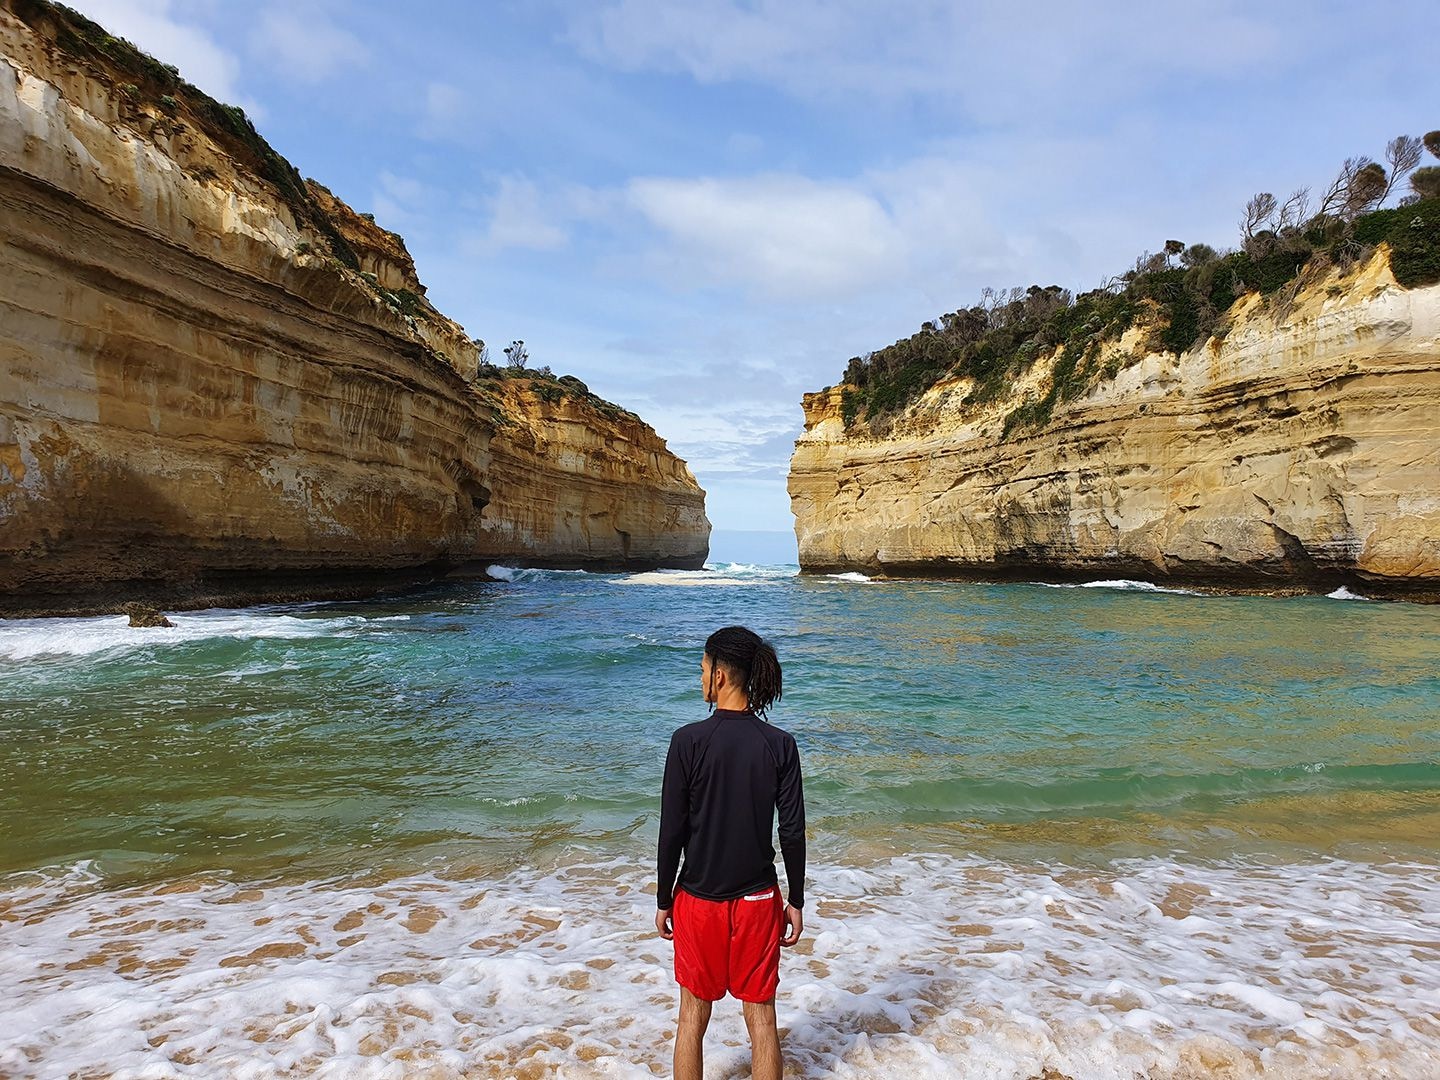 Photo captured by Galaxy S10 plusâs Wide-angle Camera of a man standing in a body of water in front of seaside cliffs.